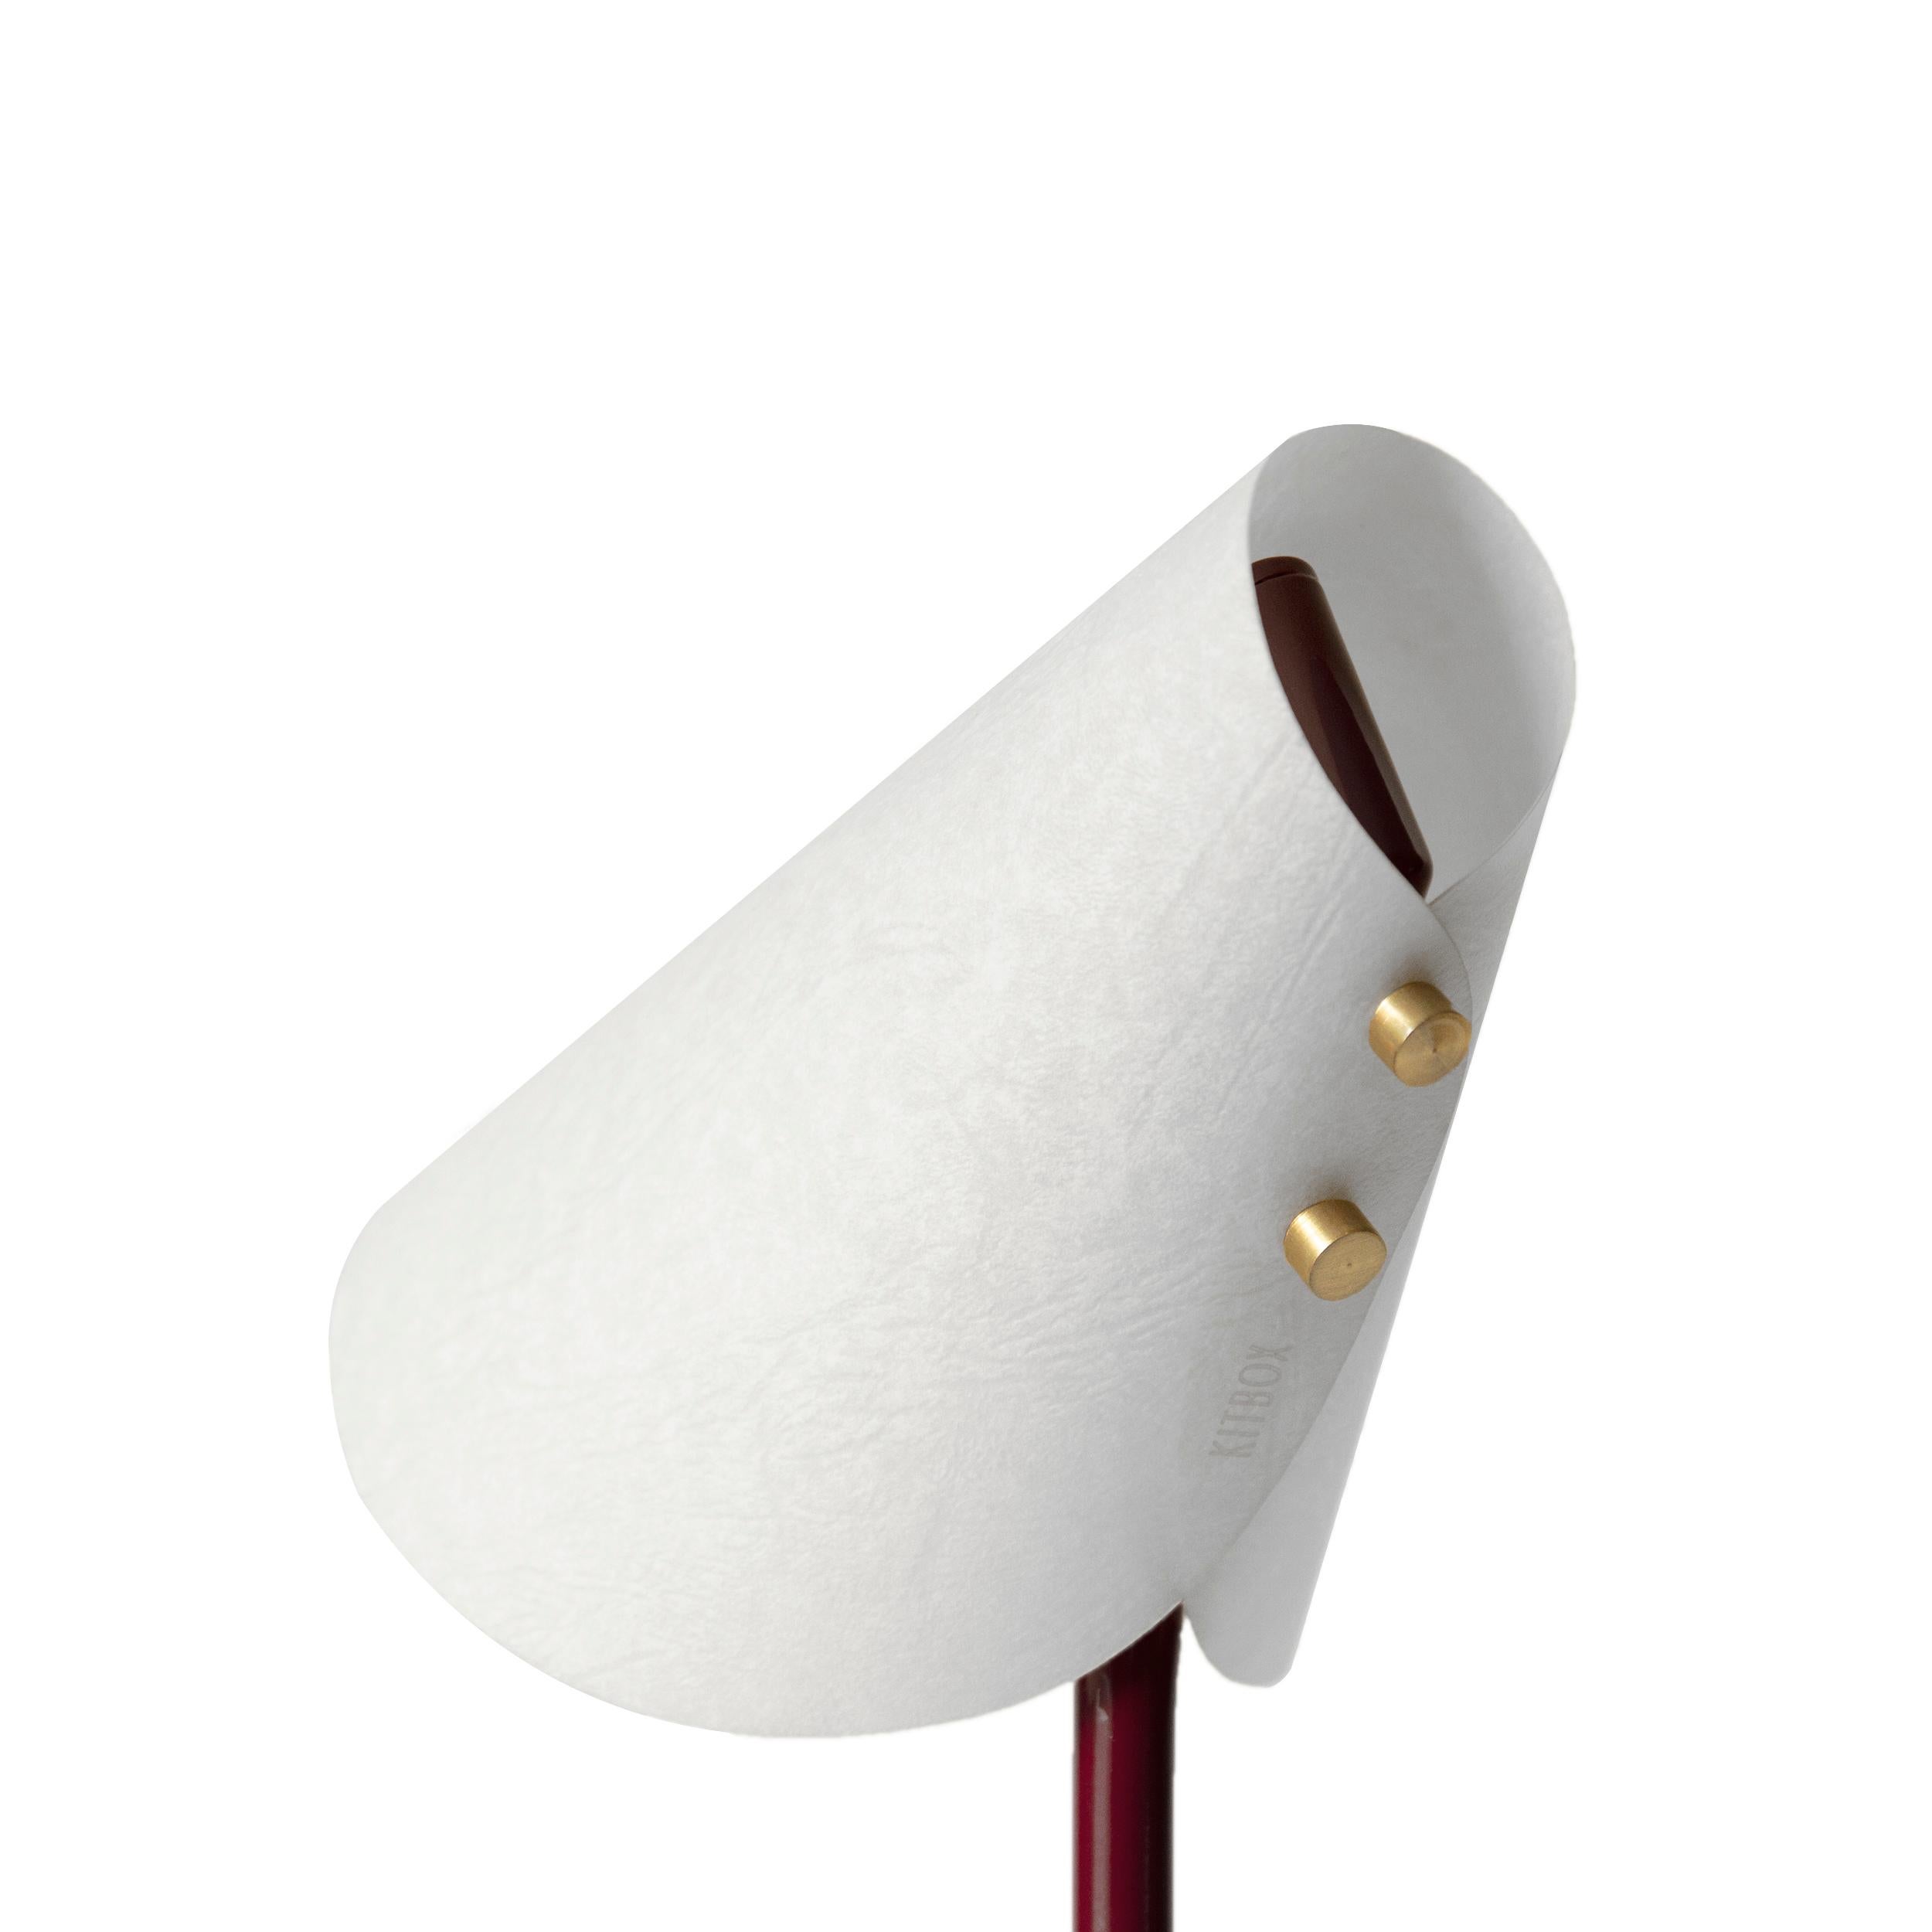 Powder-Coated June Desk Lamp, Metal & Parchment, Maroon, Inspired by Victorian Bonnets